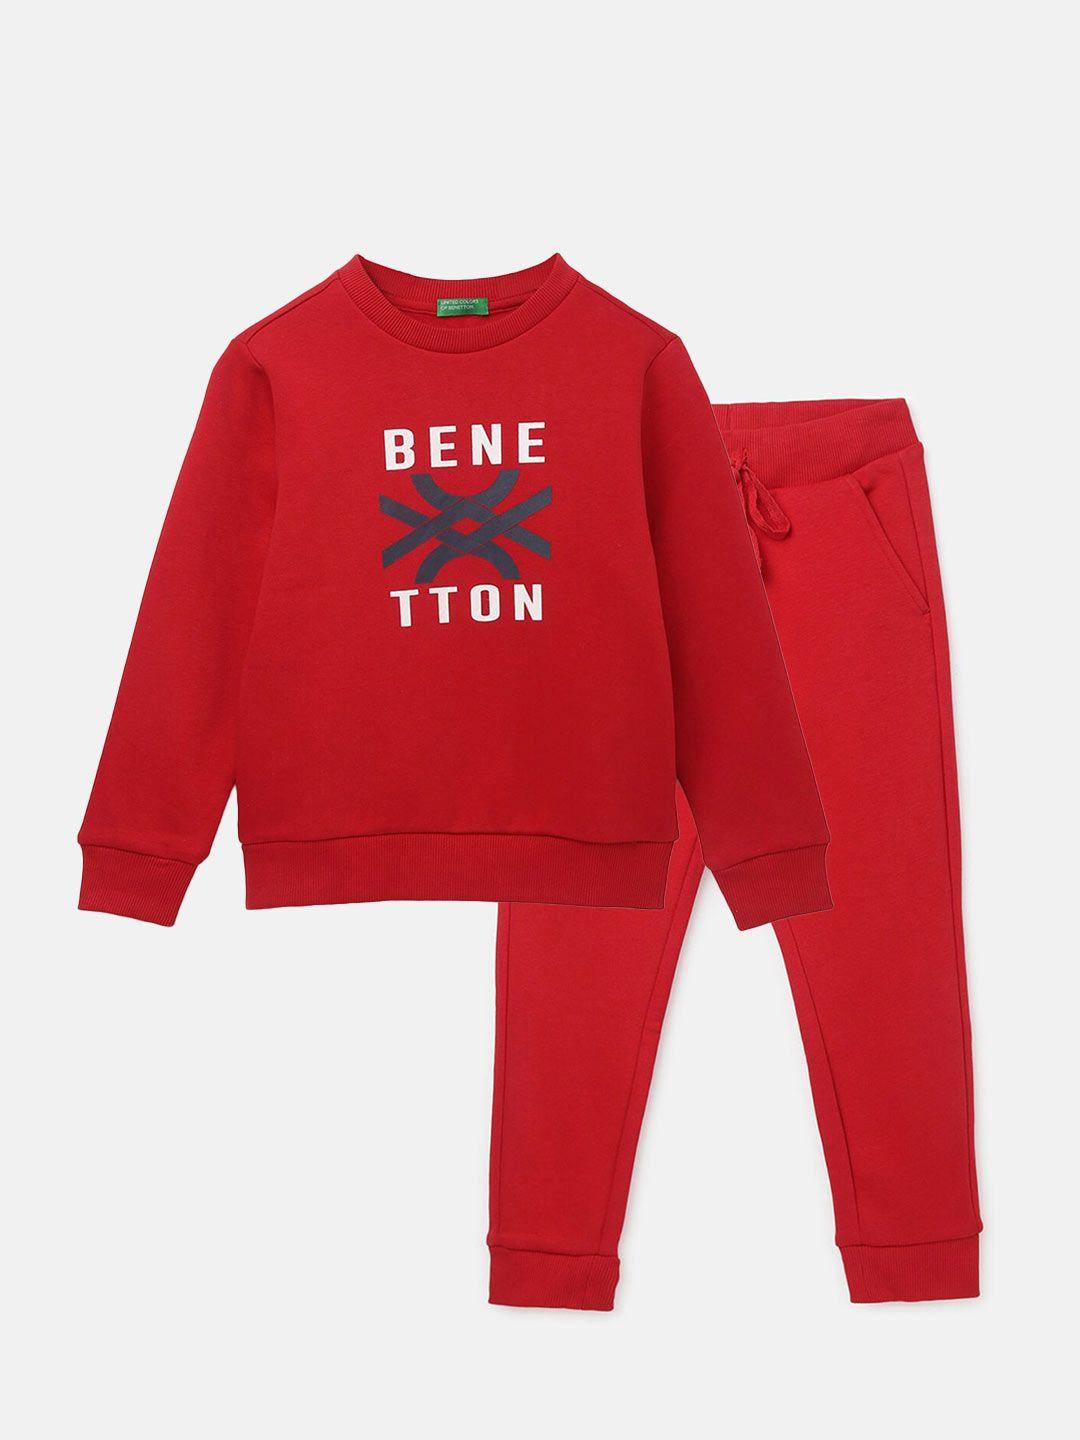 united colors of benetton boys typography printed sweatshirt and joggers